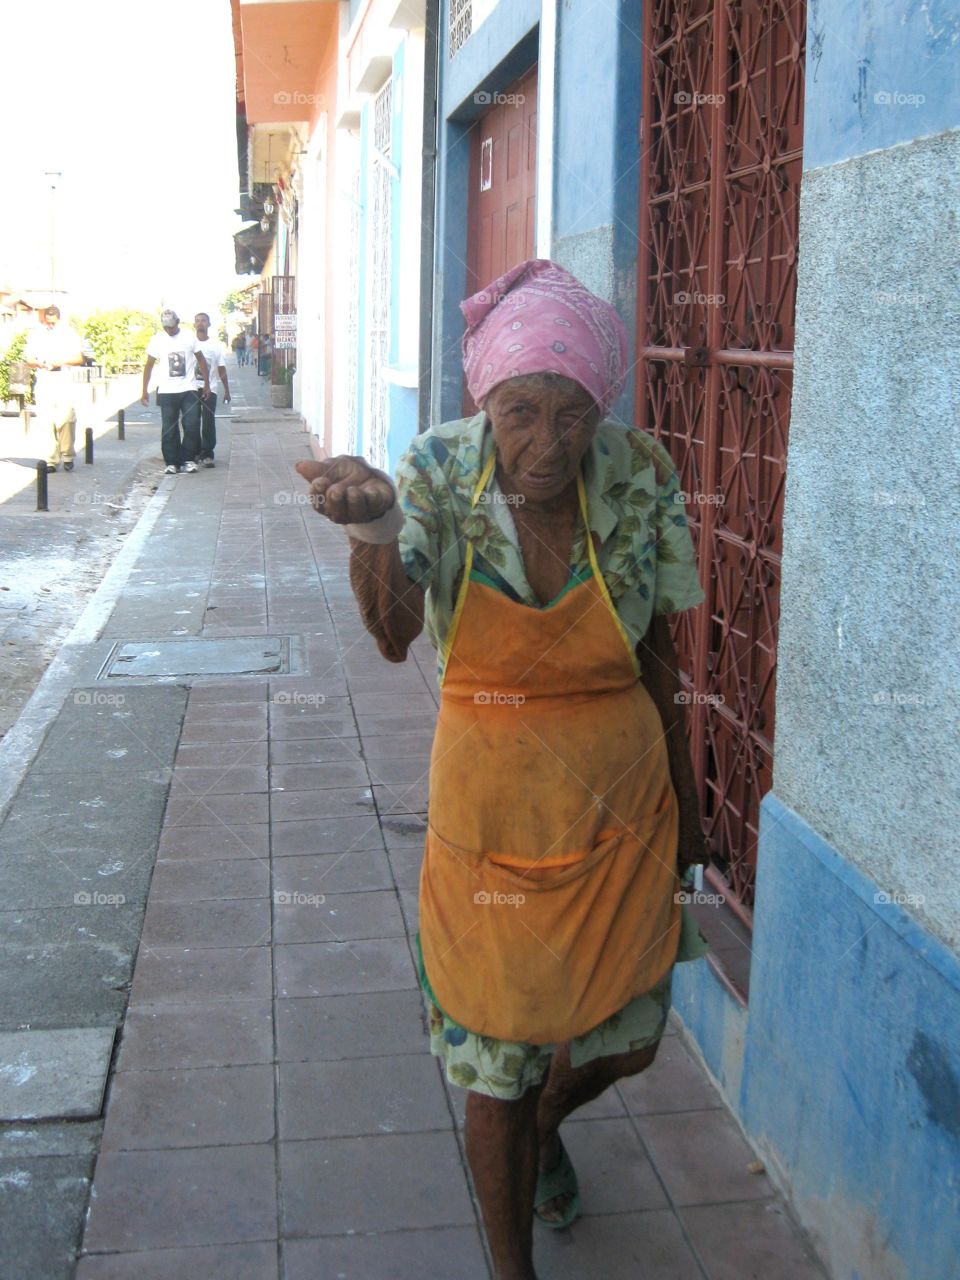 Old Woman Begging. On the streets in Nicaragua begging, and being followed by a group of men. The reason unknown. Thugs? Protectors?  I'll never know....